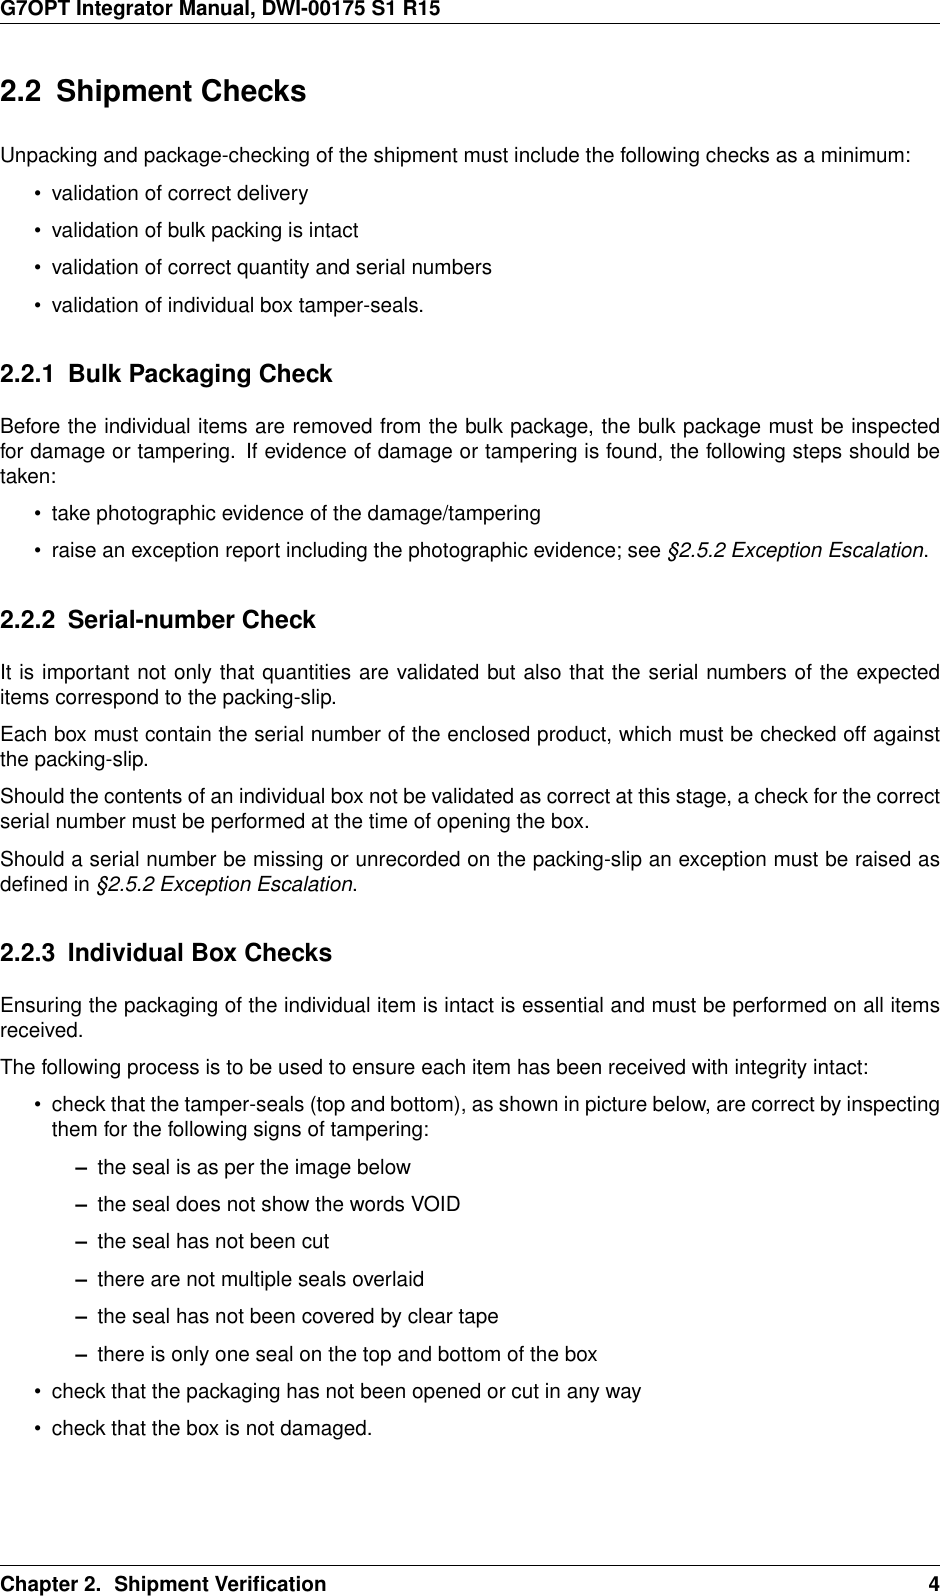 G7OPT Integrator Manual, DWI-00175 S1 R152.2 Shipment ChecksUnpacking and package-checking of the shipment must include the following checks as a minimum:• validation of correct delivery• validation of bulk packing is intact• validation of correct quantity and serial numbers• validation of individual box tamper-seals.2.2.1 Bulk Packaging CheckBefore the individual items are removed from the bulk package, the bulk package must be inspectedfor damage or tampering. If evidence of damage or tampering is found, the following steps should betaken:• take photographic evidence of the damage/tampering• raise an exception report including the photographic evidence; see §2.5.2 Exception Escalation.2.2.2 Serial-number CheckIt is important not only that quantities are validated but also that the serial numbers of the expecteditems correspond to the packing-slip.Each box must contain the serial number of the enclosed product, which must be checked off againstthe packing-slip.Should the contents of an individual box not be validated as correct at this stage, a check for the correctserial number must be performed at the time of opening the box.Should a serial number be missing or unrecorded on the packing-slip an exception must be raised asdeﬁned in §2.5.2 Exception Escalation.2.2.3 Individual Box ChecksEnsuring the packaging of the individual item is intact is essential and must be performed on all itemsreceived.The following process is to be used to ensure each item has been received with integrity intact:• check that the tamper-seals (top and bottom), as shown in picture below, are correct by inspectingthem for the following signs of tampering:–the seal is as per the image below–the seal does not show the words VOID–the seal has not been cut–there are not multiple seals overlaid–the seal has not been covered by clear tape–there is only one seal on the top and bottom of the box• check that the packaging has not been opened or cut in any way• check that the box is not damaged.Chapter 2. Shipment Veriﬁcation 4